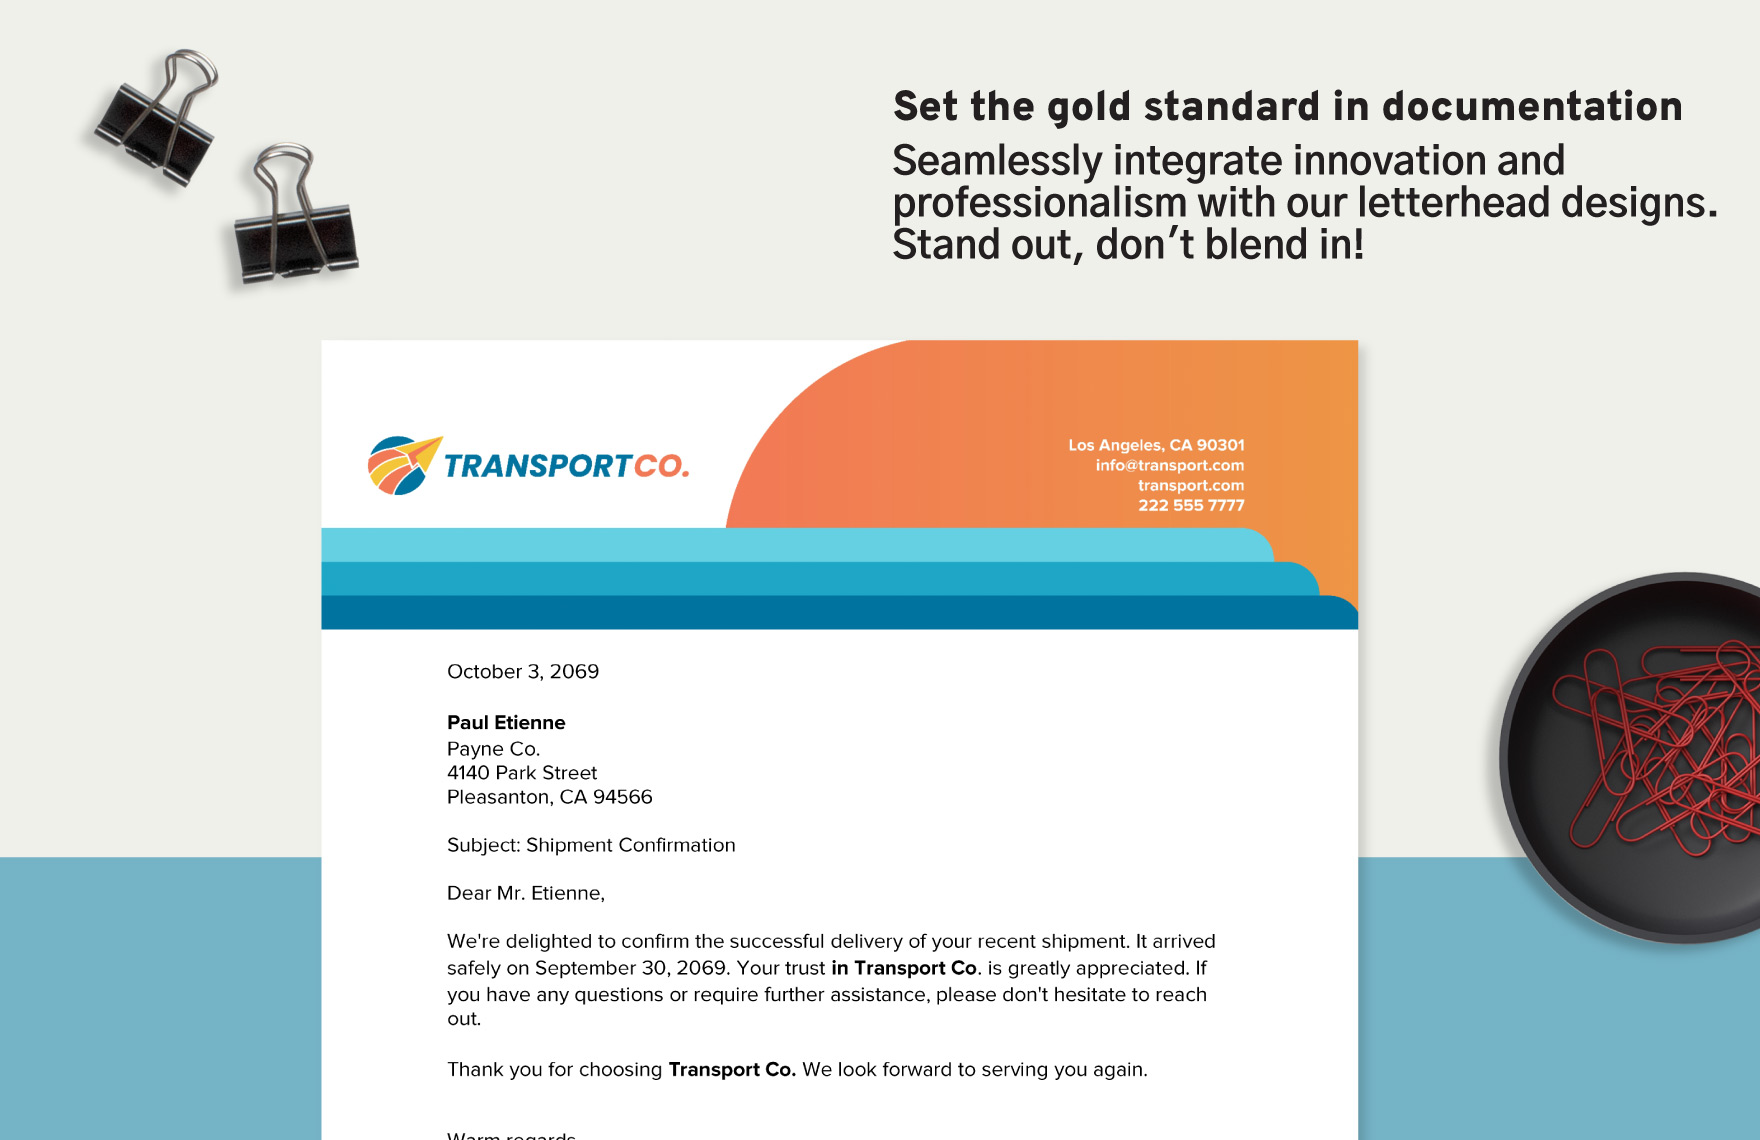 Transport and Logistics Supply Chain Management Letterhead Template